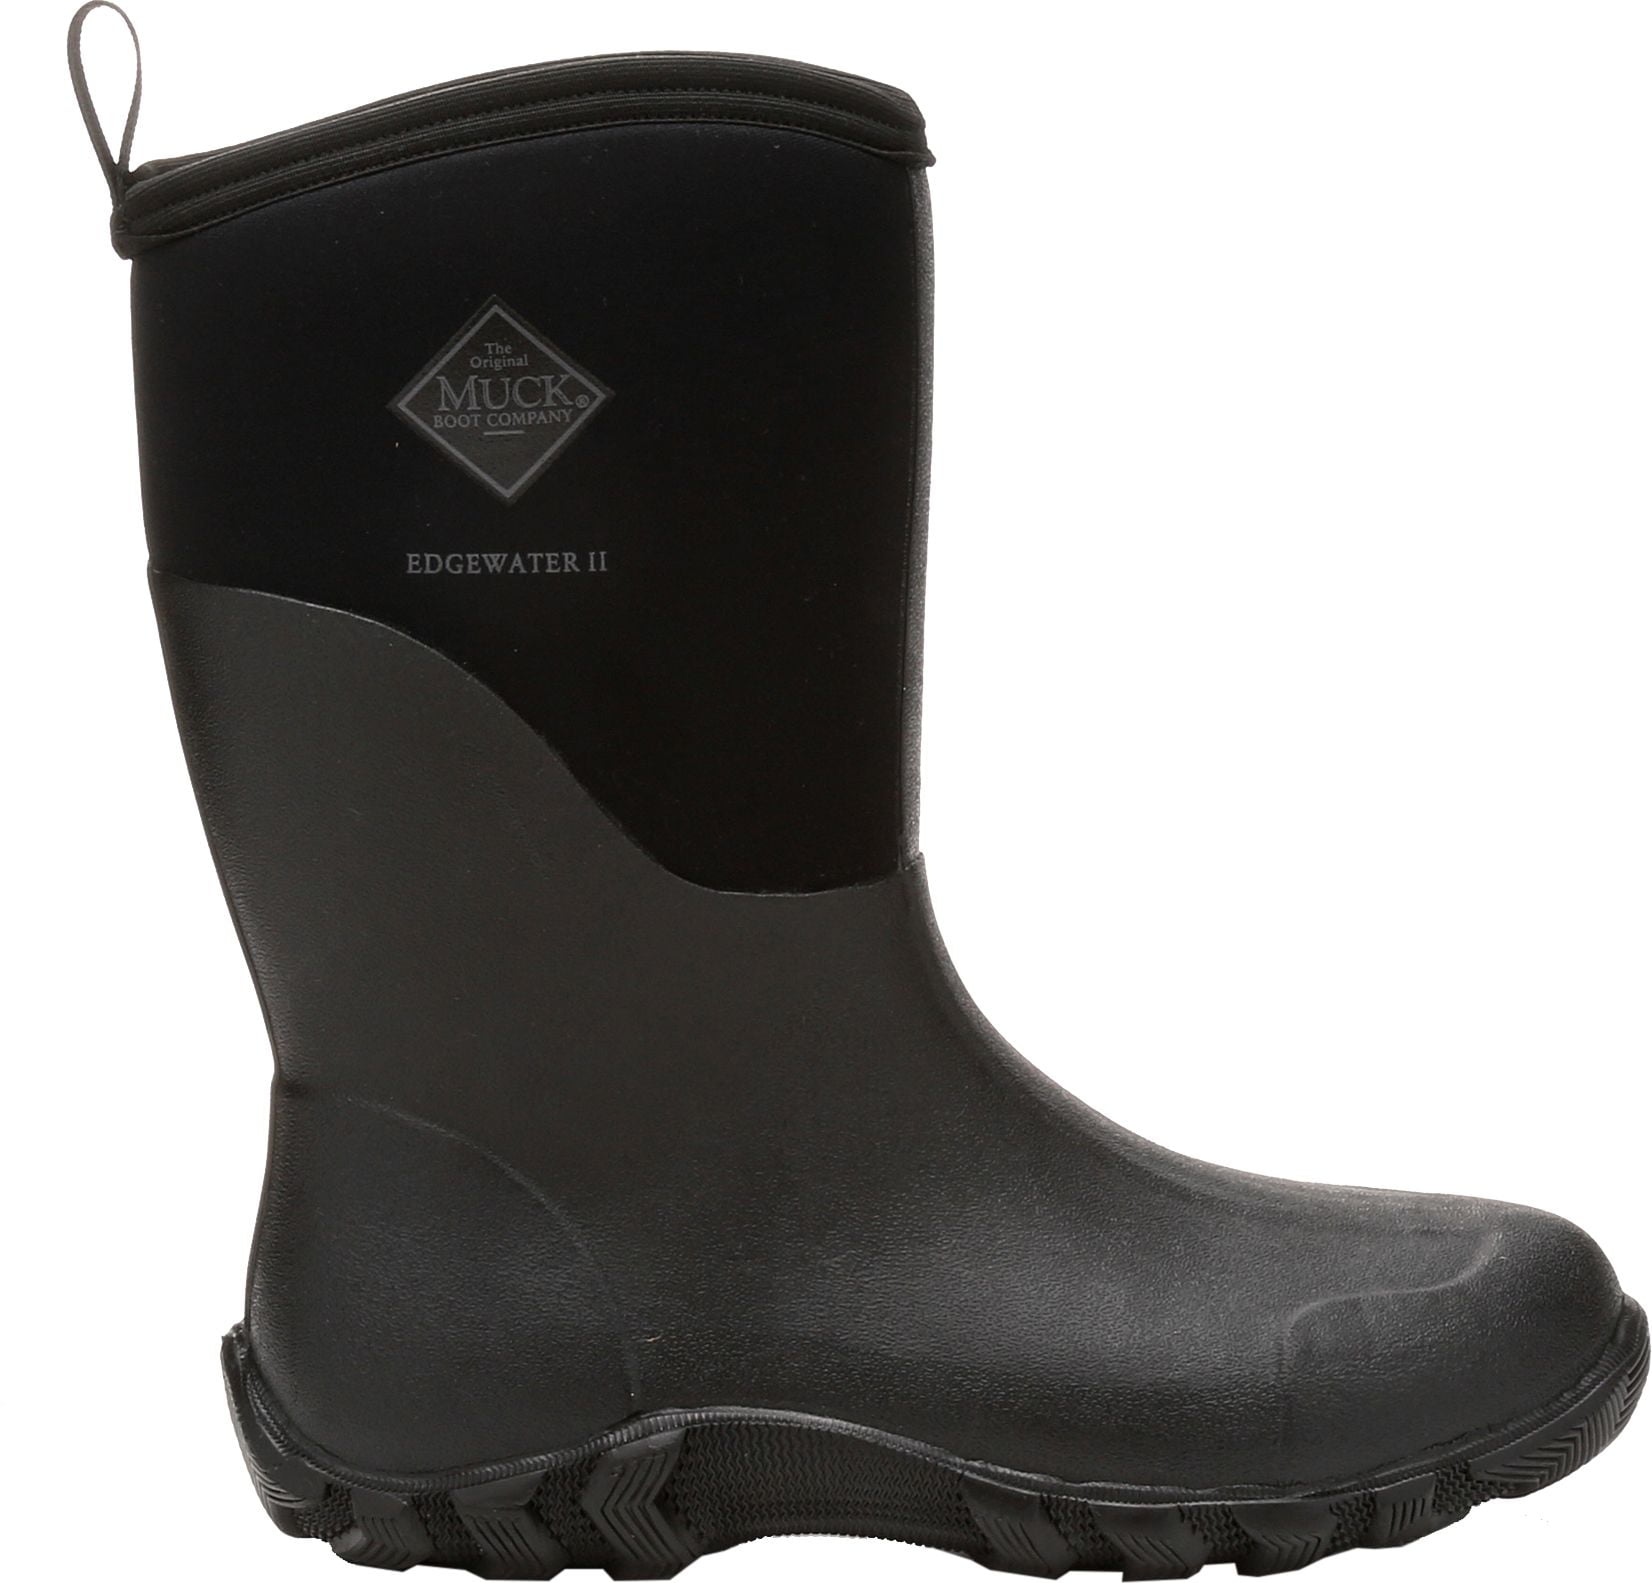 Muck Boot Company - Muck Boots Men's Edgewater II Mid Insulated Rubber ...